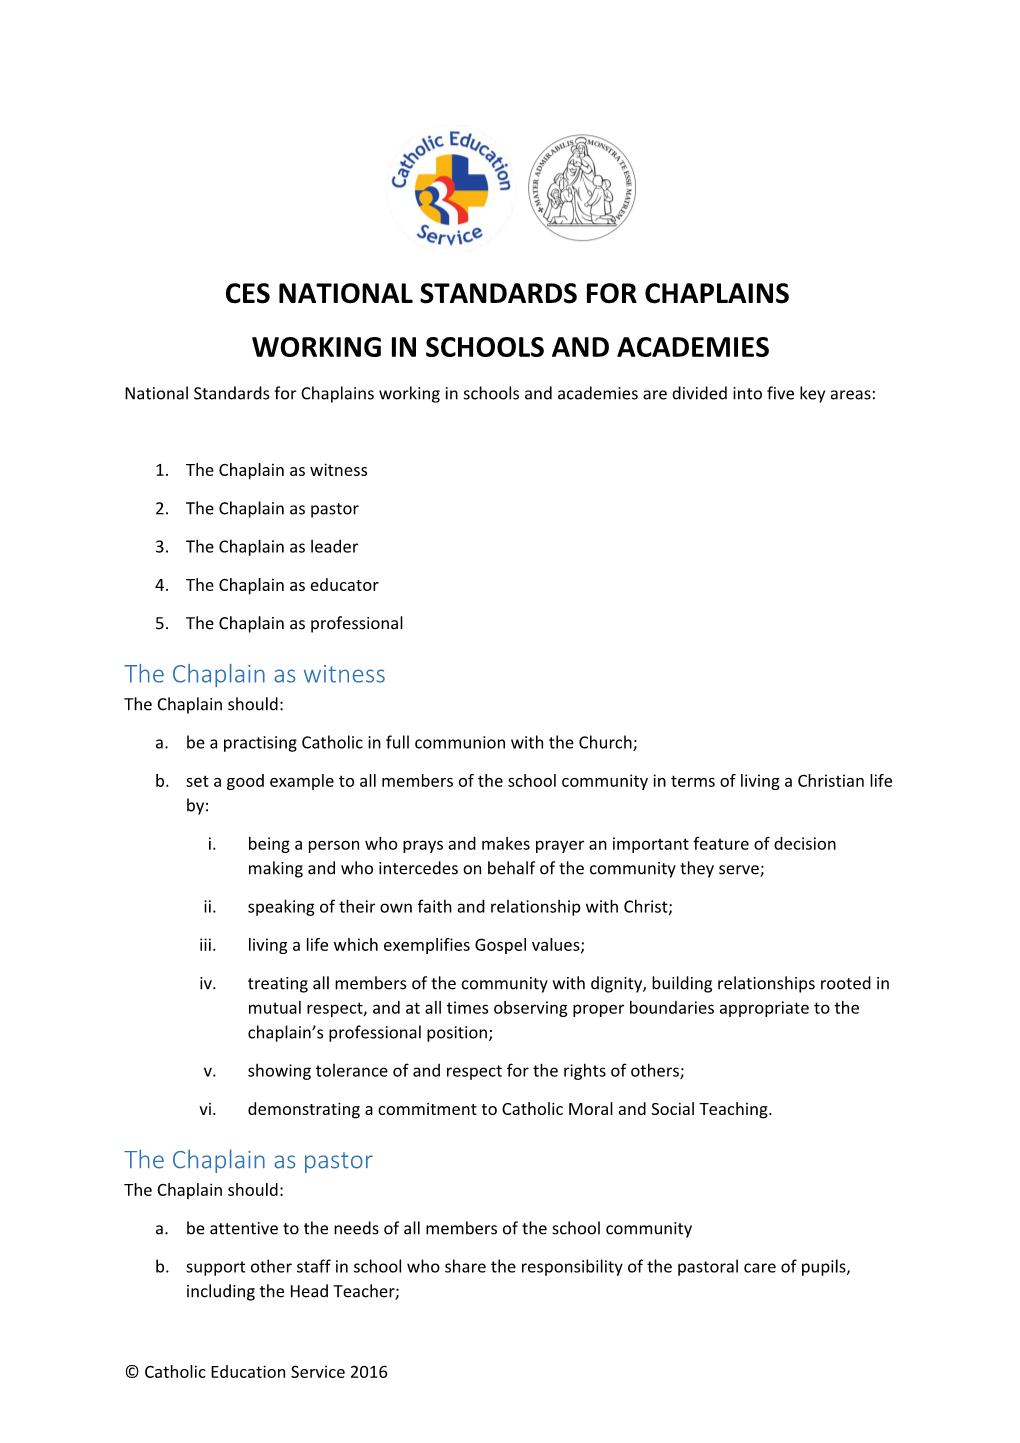 Ces National Standards for Chaplains